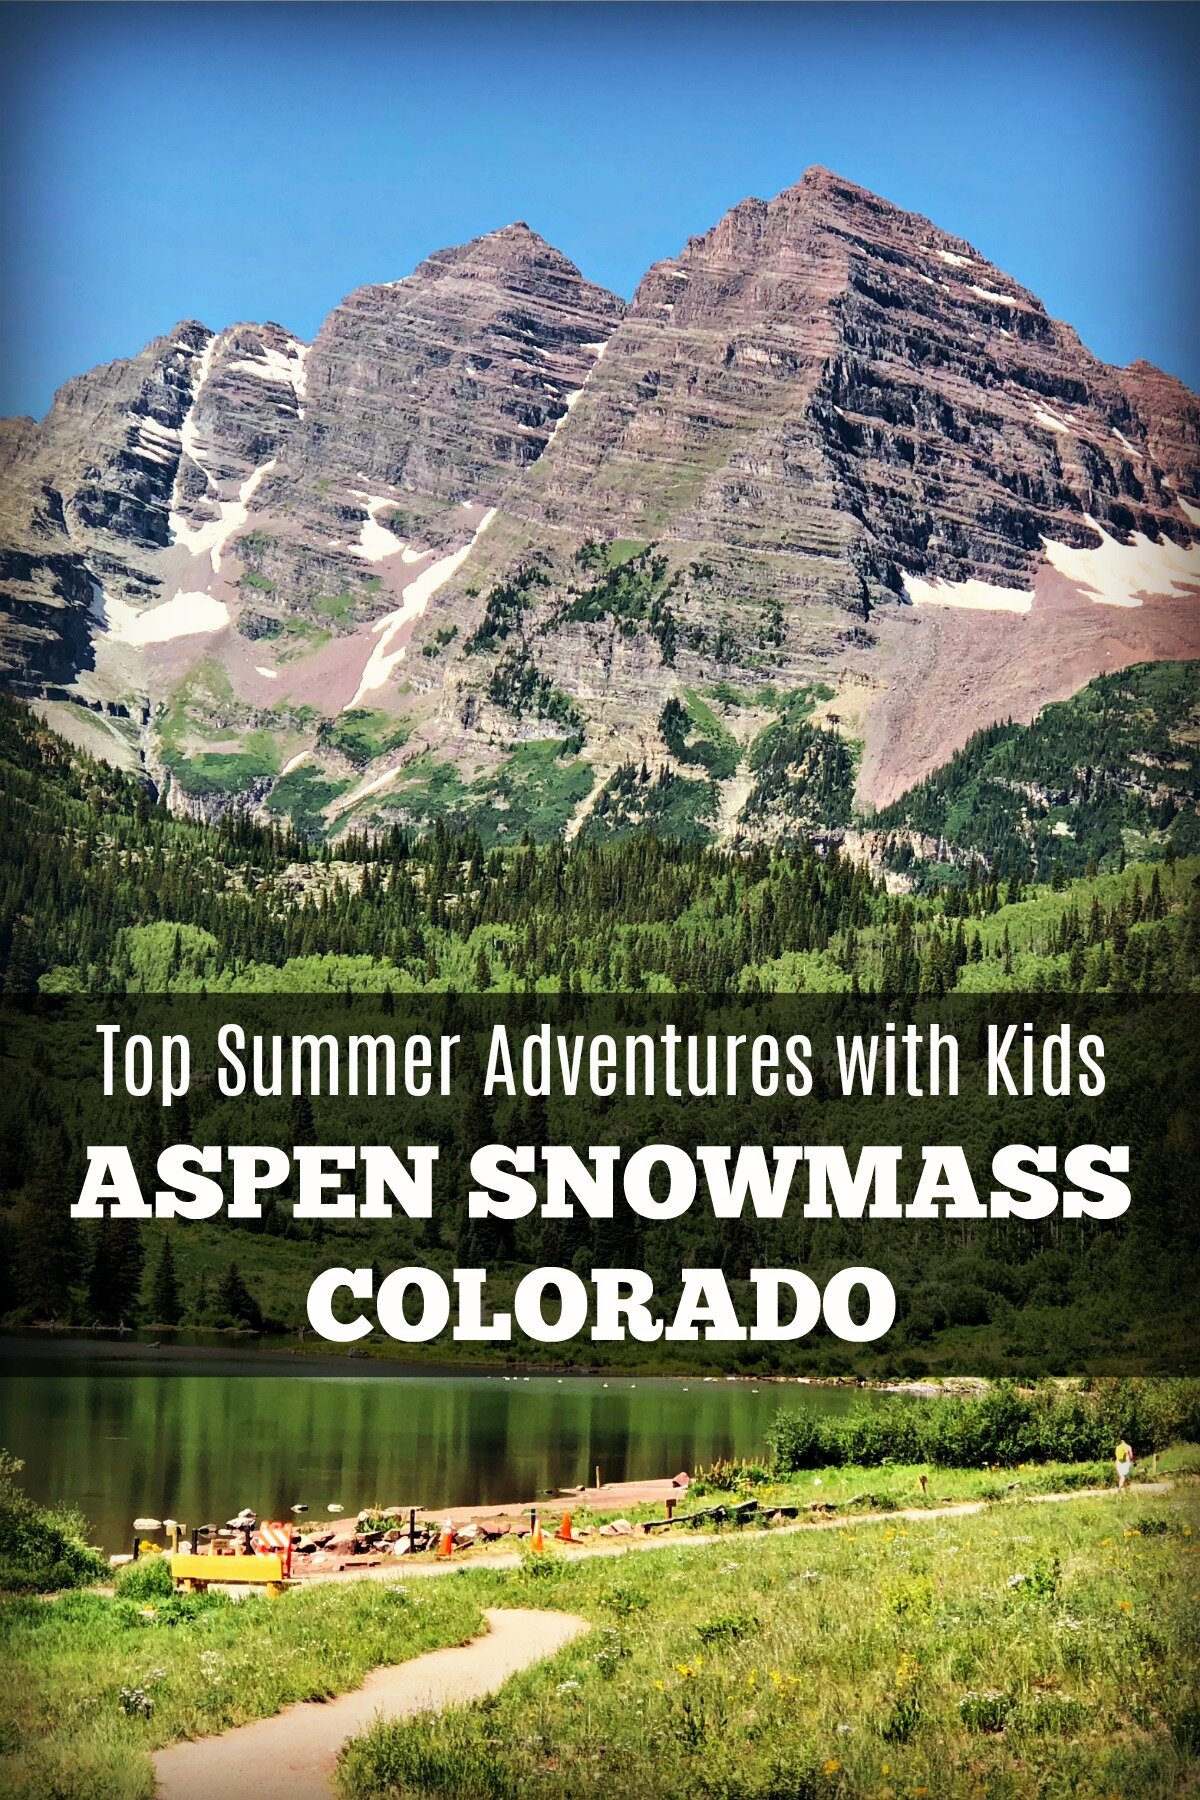 Top summer activities to do with kids in Aspen Snowmass, Colorado